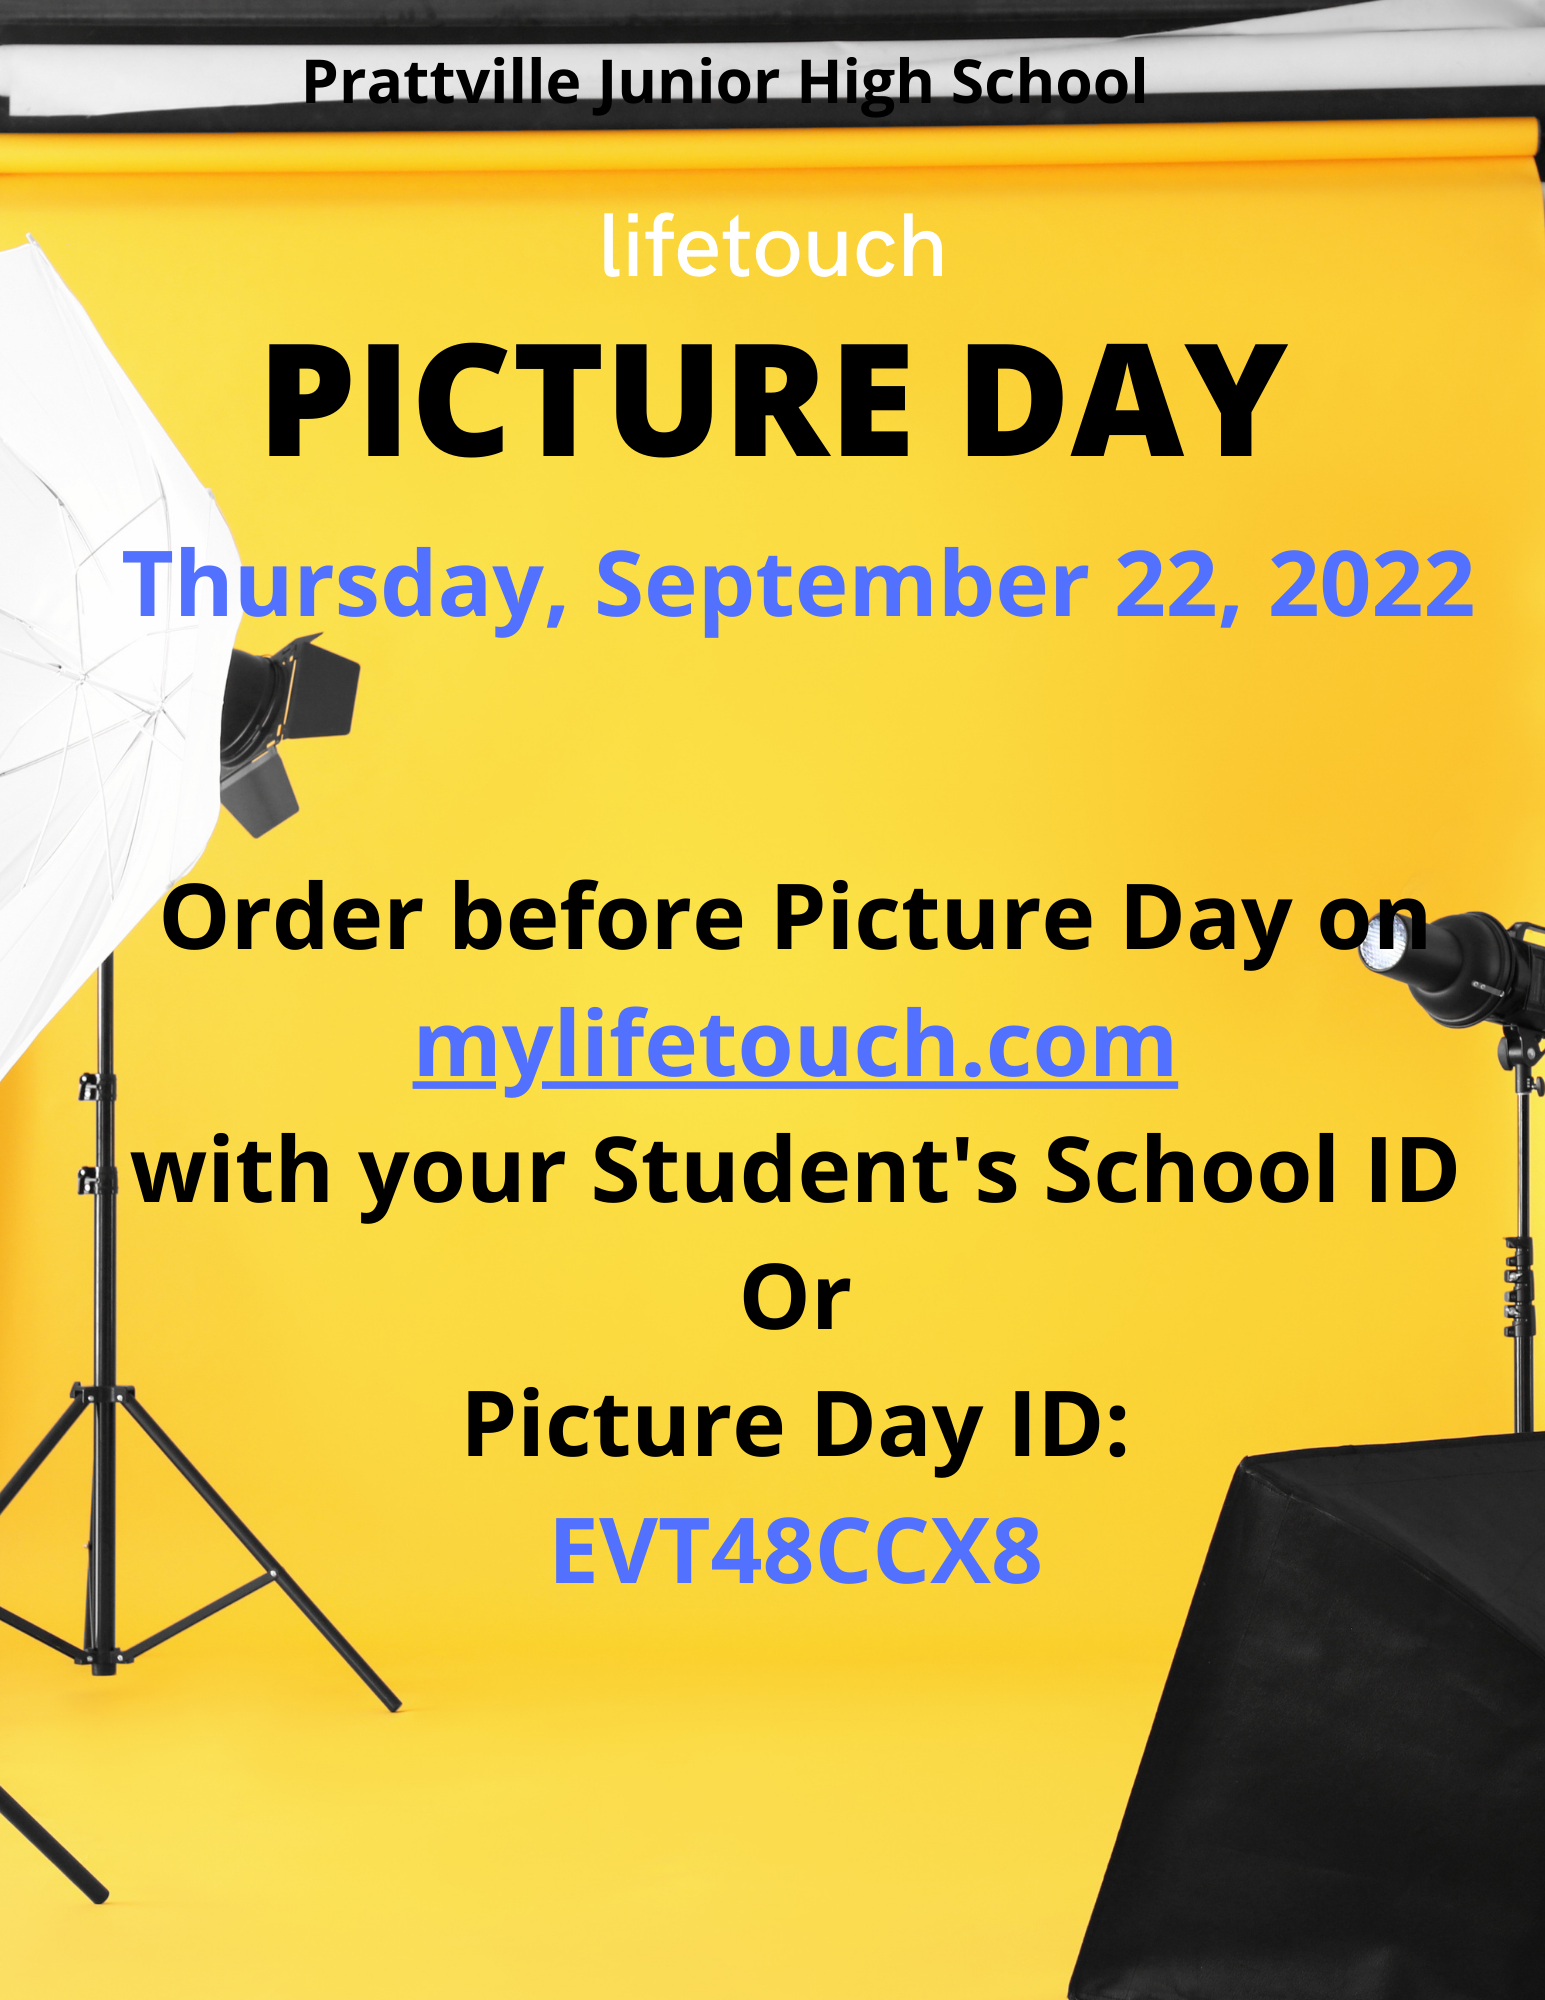 Picture Day is September 22, 2022.  Order before Picture Day on mylifetouch.com using your Picture Day ID:  EVT48CCX8